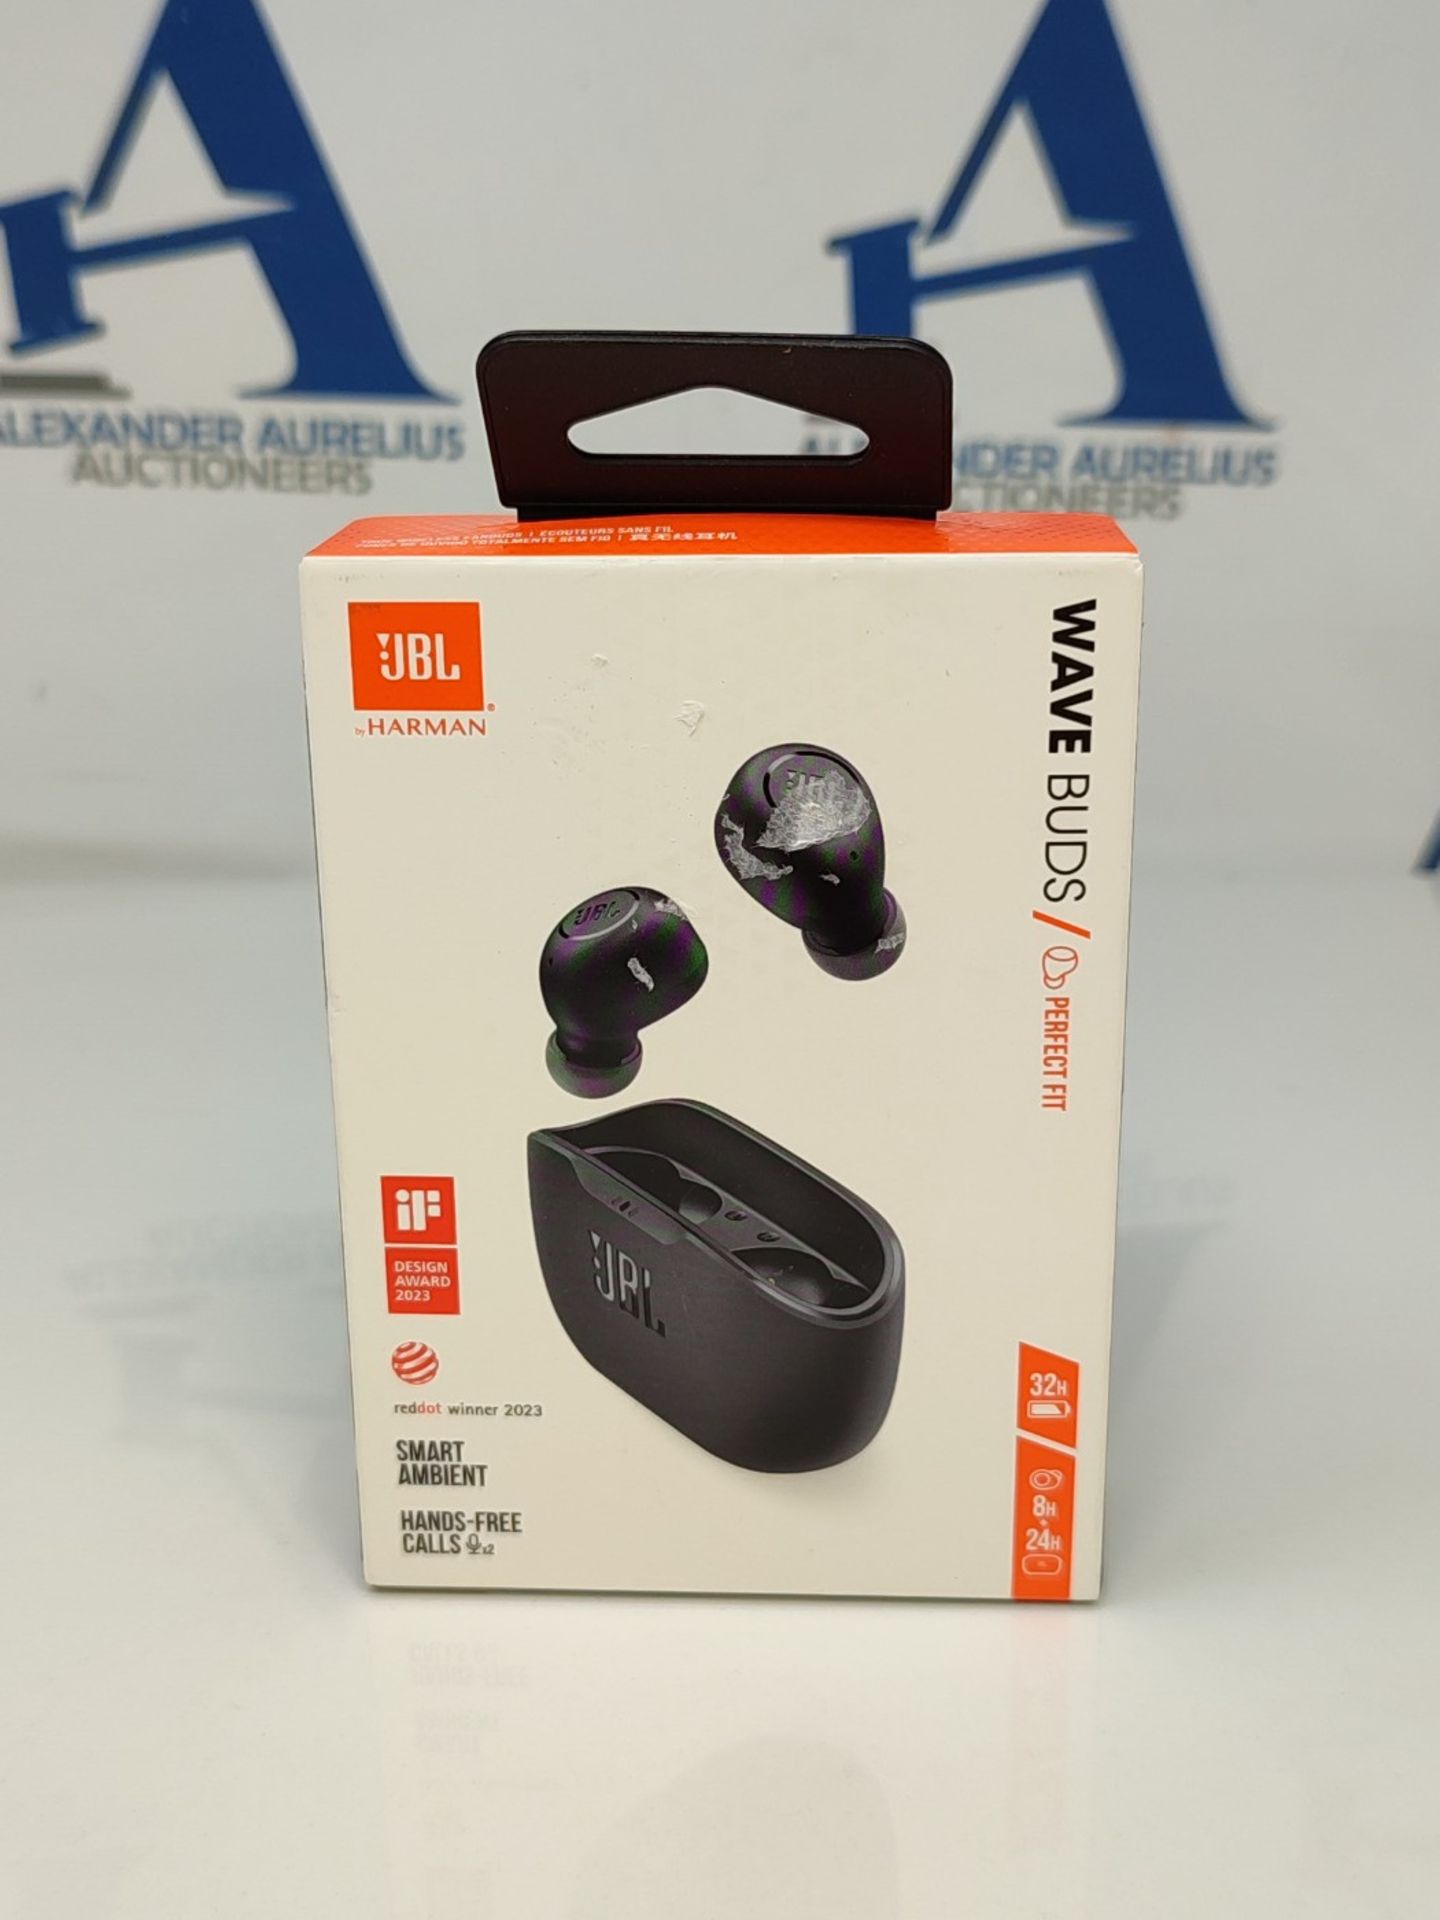 JBL Wave Buds - Wireless In-Ear Earbuds with IP54 and IPX2 waterproofing - Powerful ba - Image 5 of 6